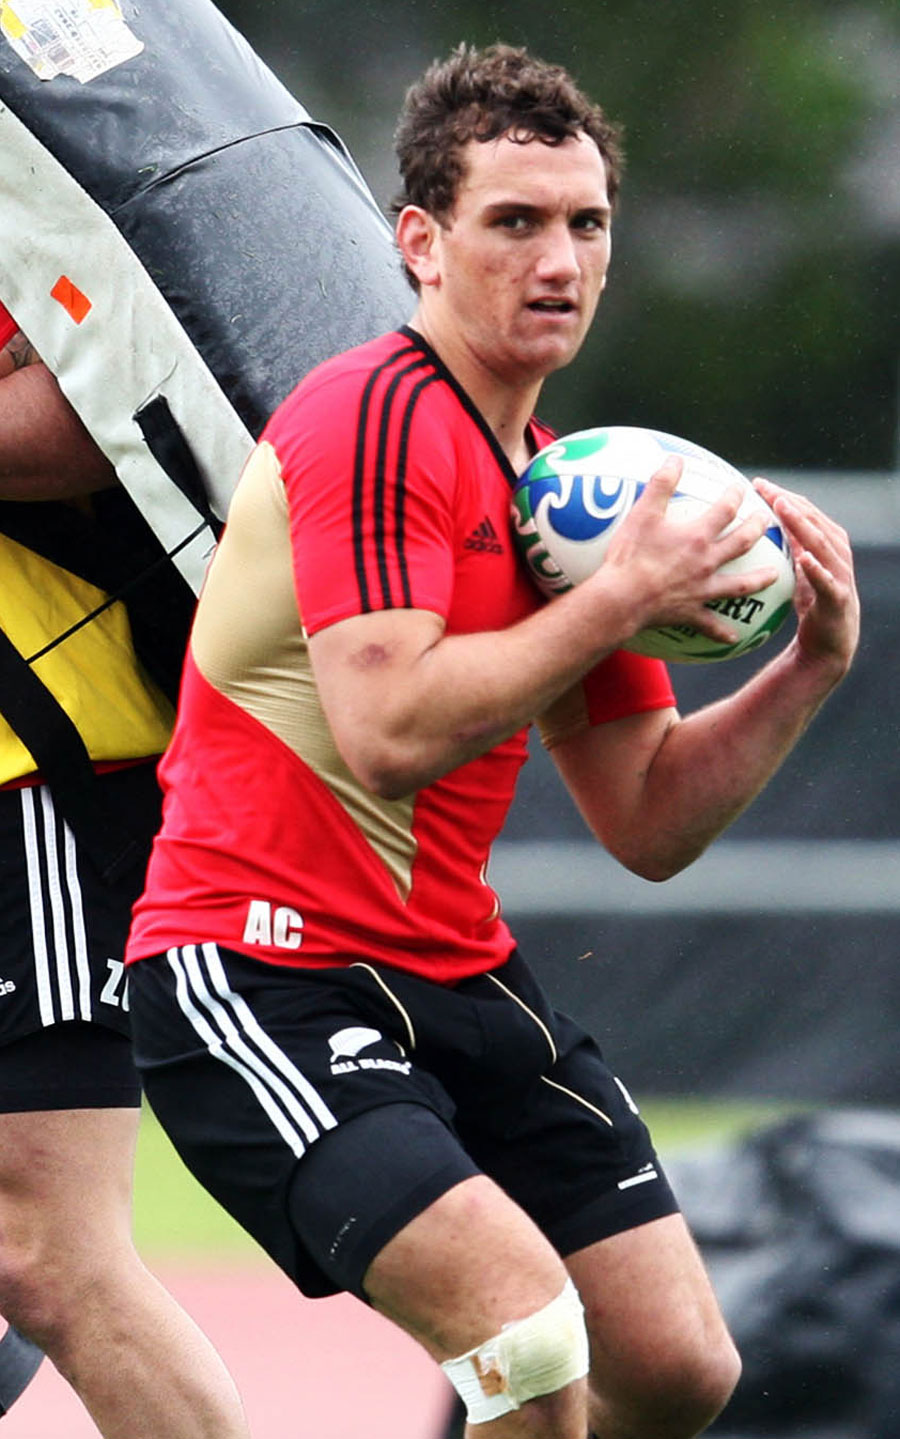 All Blacks fly-half Aaron Cruden claims the ball in training